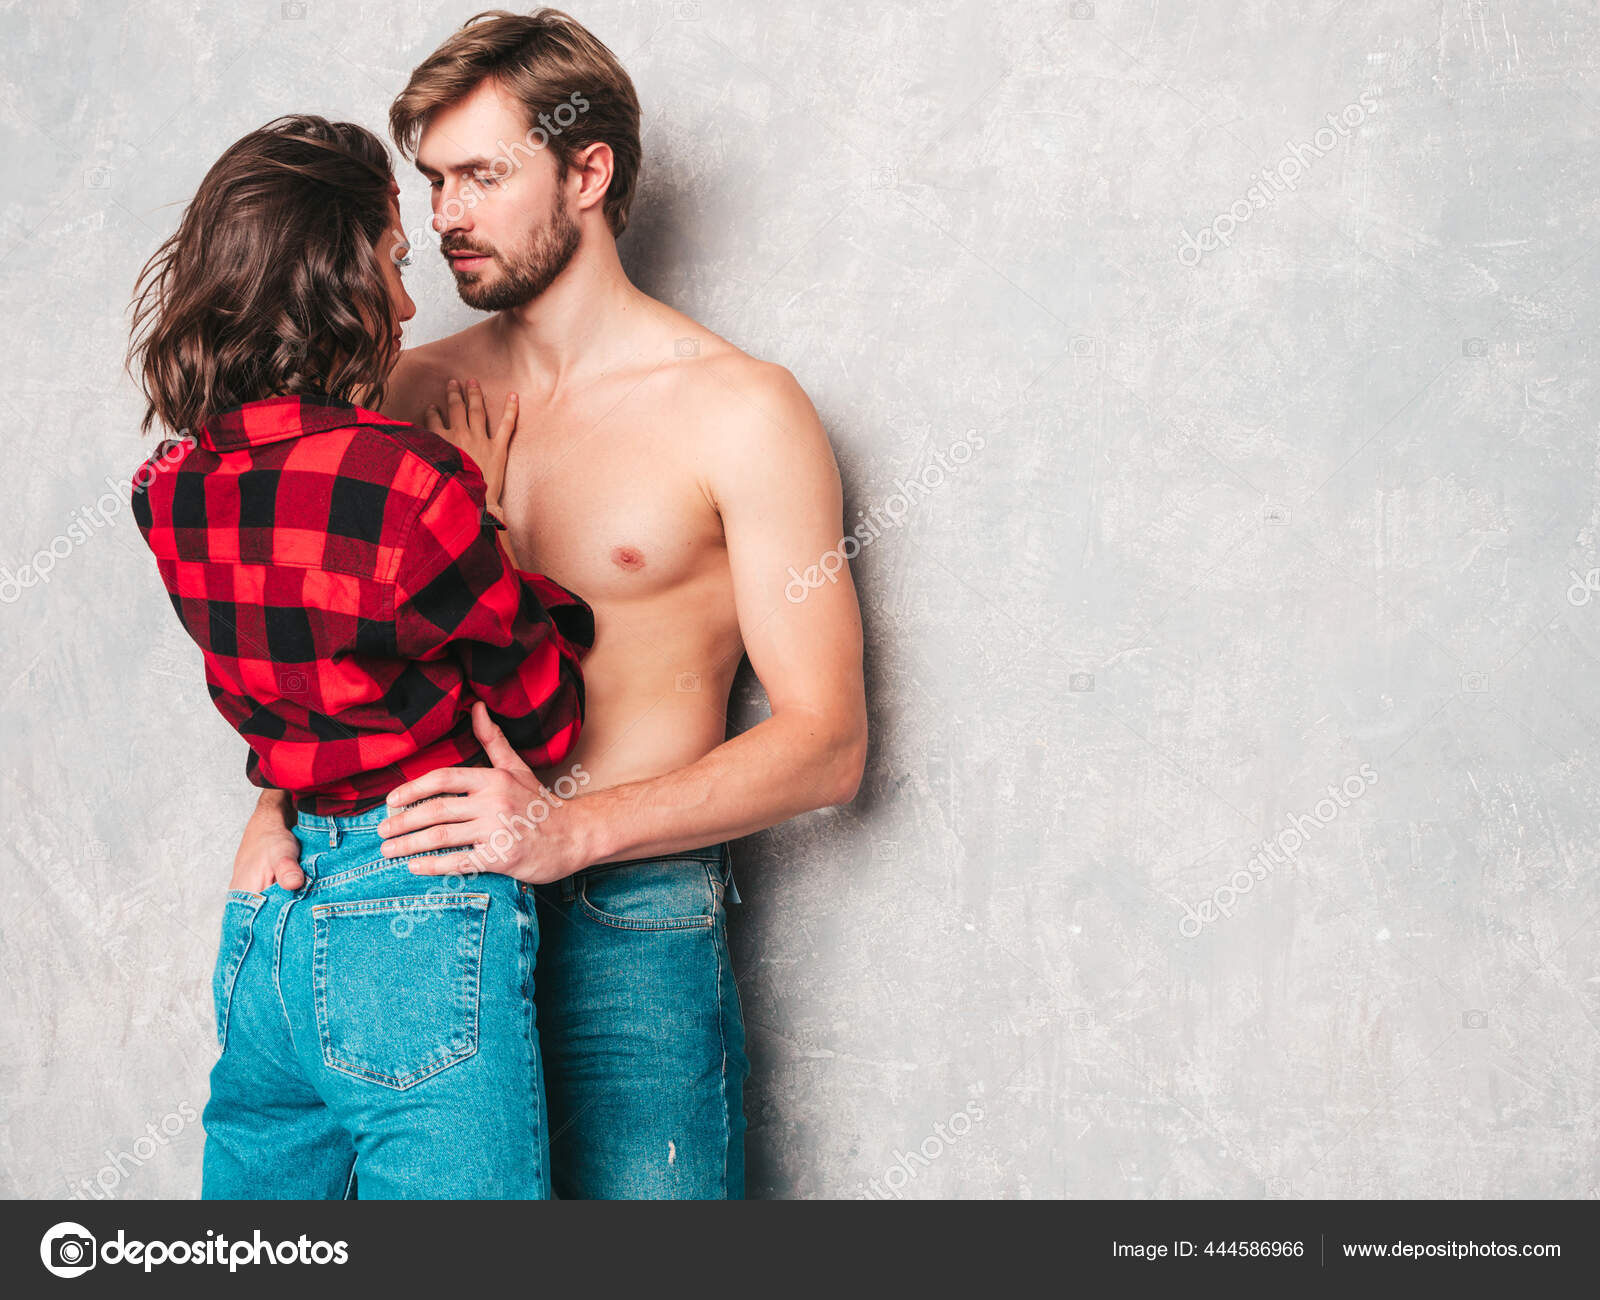 Hot Beautiful Woman Her Handsome Boyfriend Models Posing Gray Wall Stock Photo by ©alexhalay 444586966